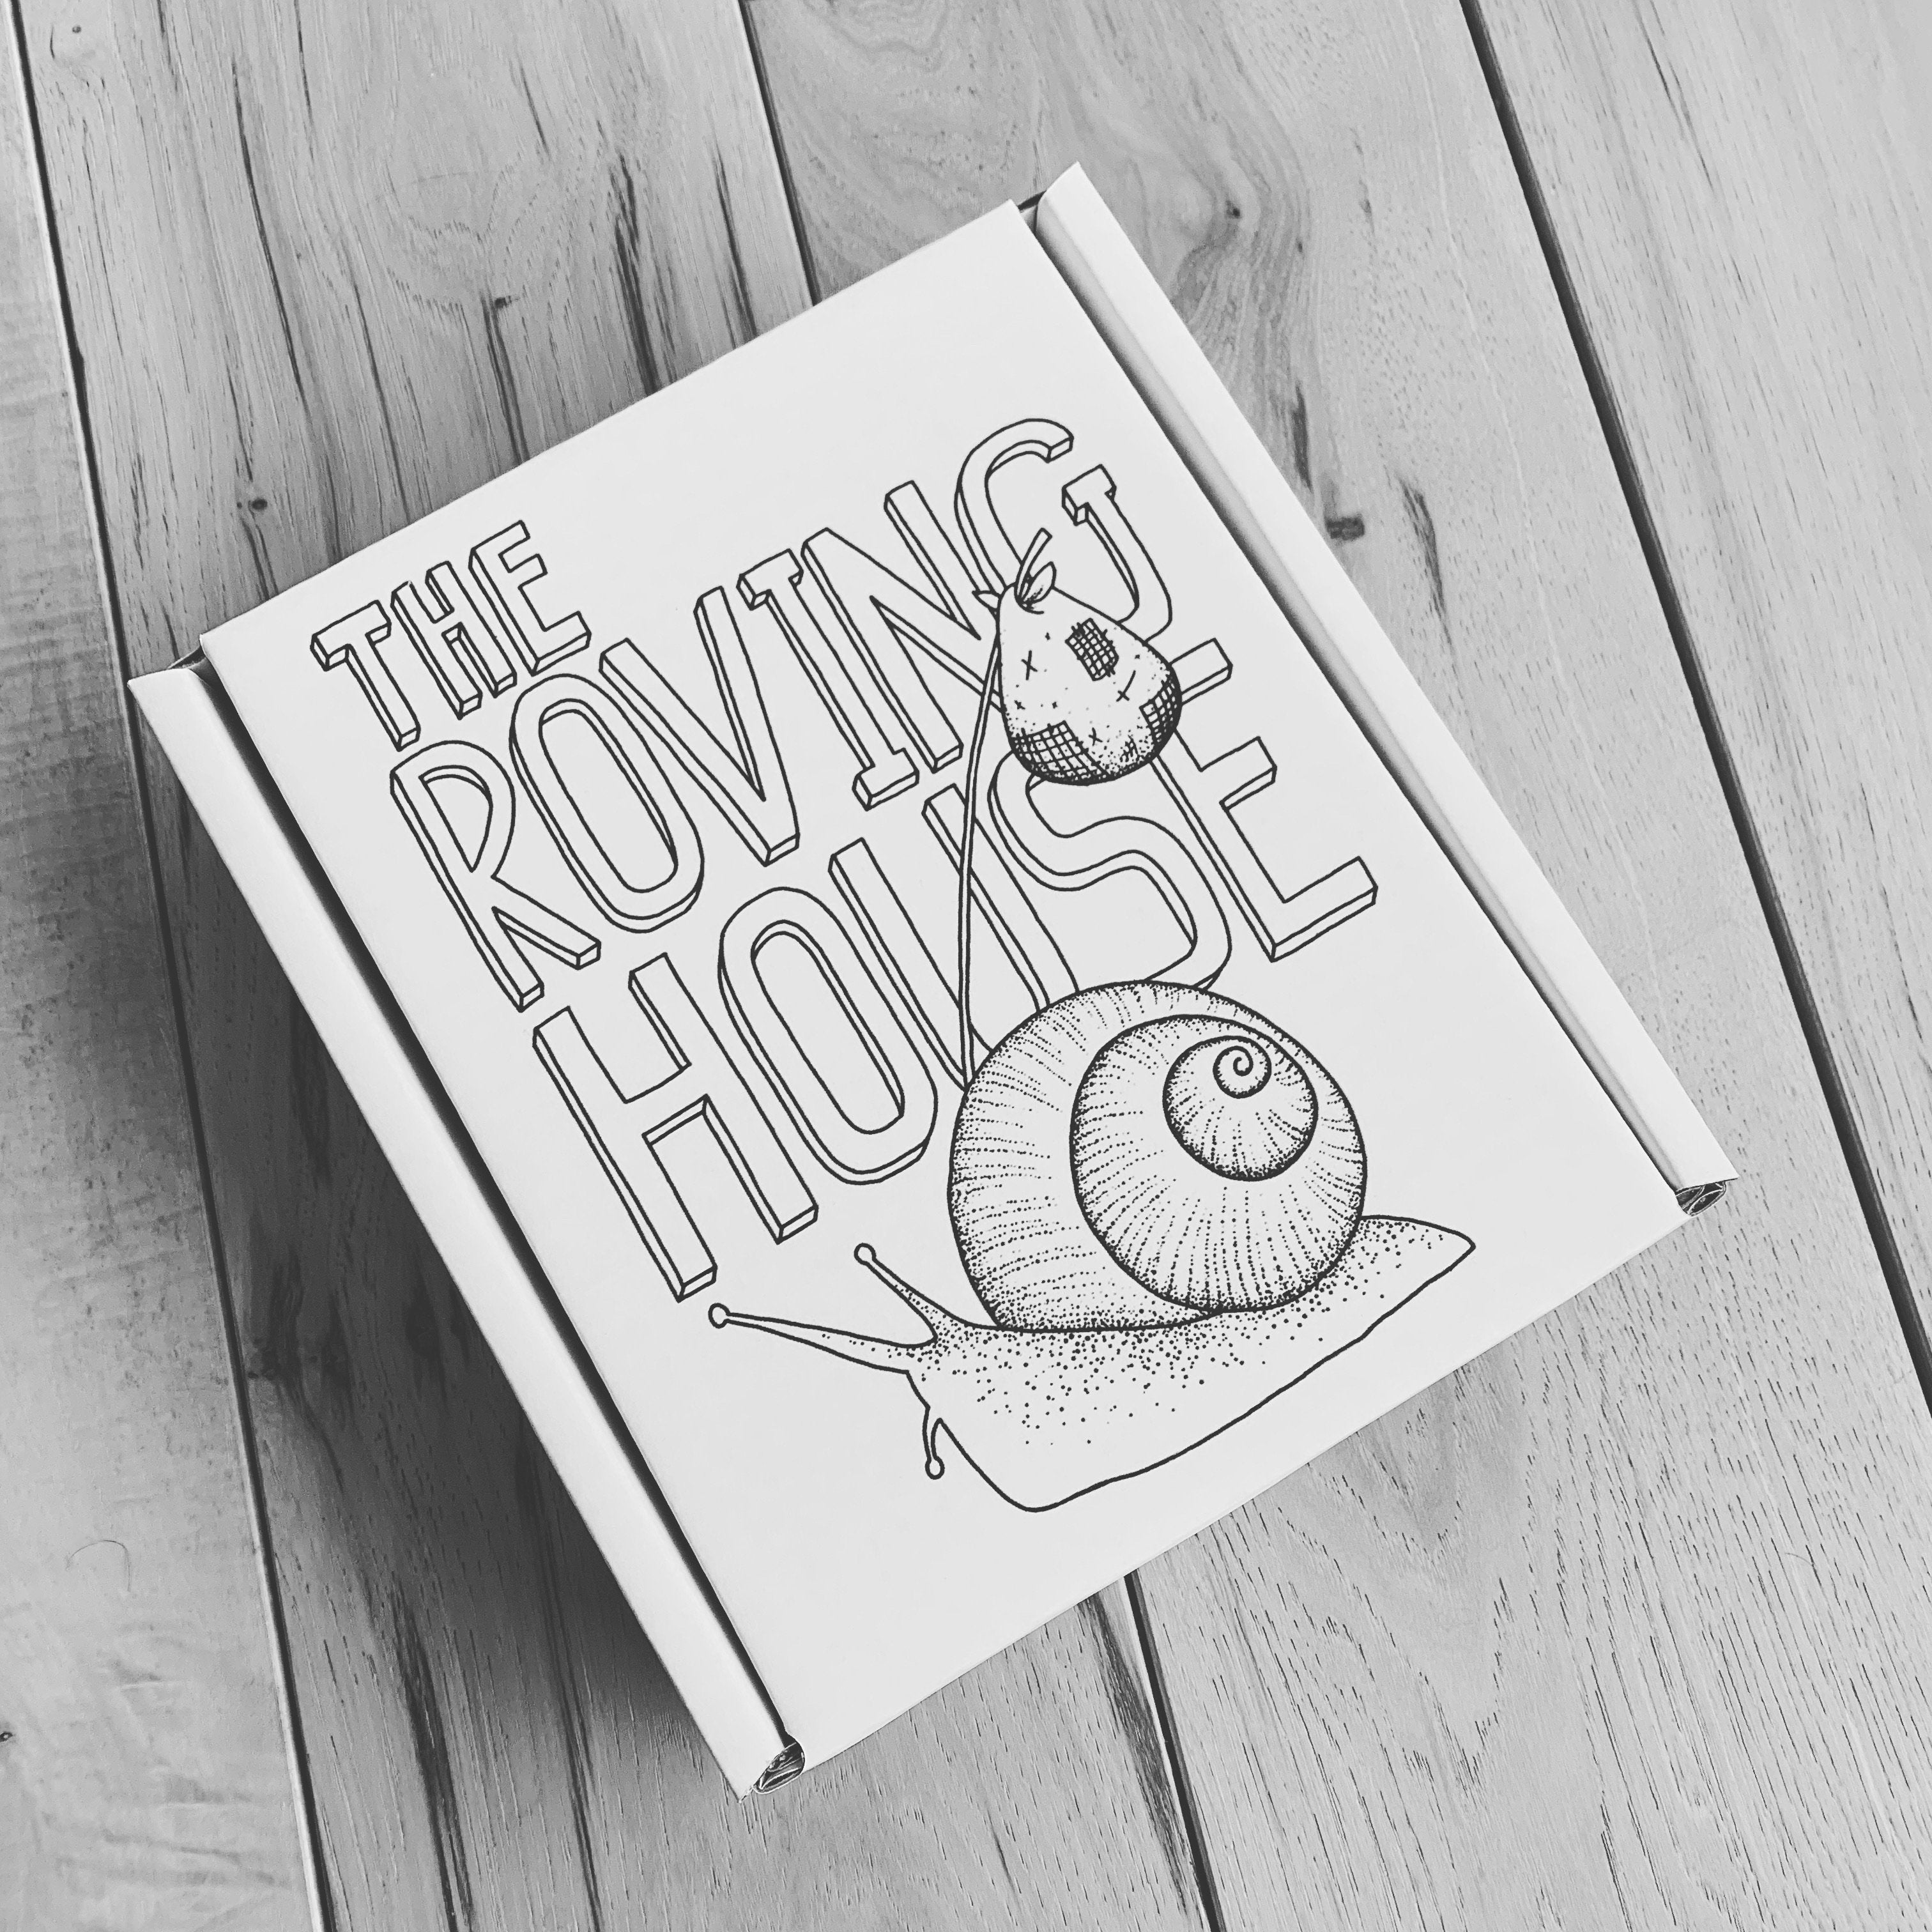 A black & white image of a white carboard box featuring our snail logo, sitting on a hardwood floor. The box is sealed, hiding its contents.